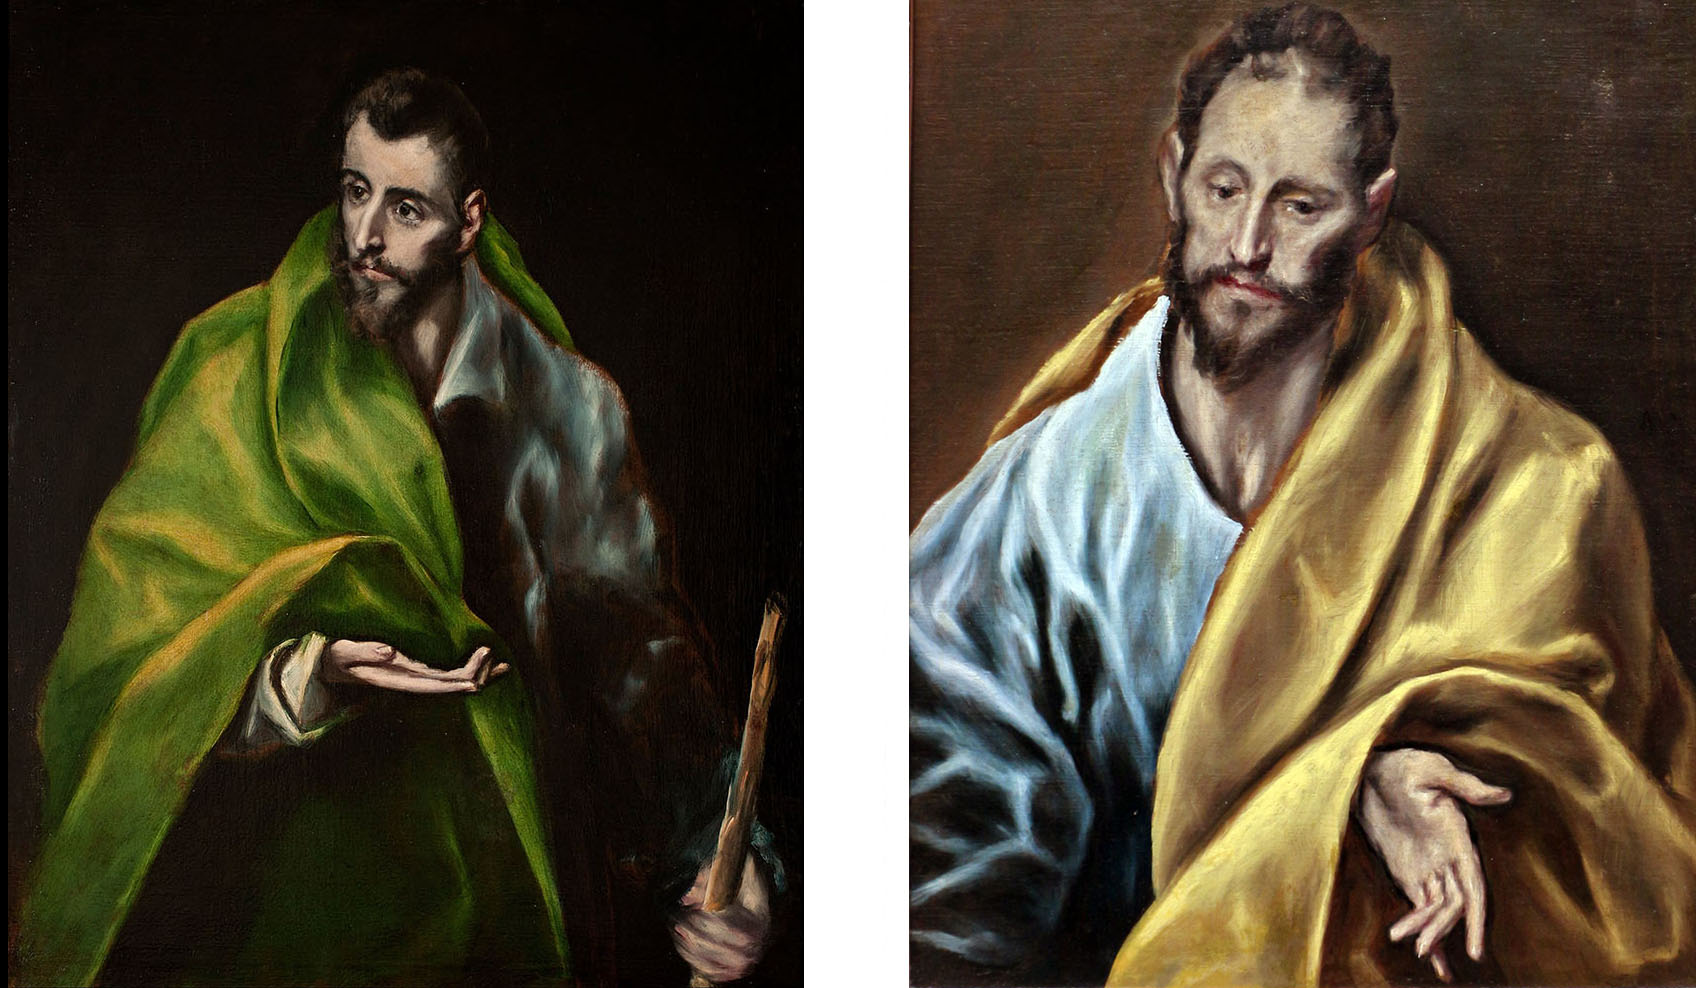 El Greco’s portrait of St. James the Greater, his hand sending pilgrims on the road to Santiago, and St. James the Less, his hand pointing down to rootedness and stability